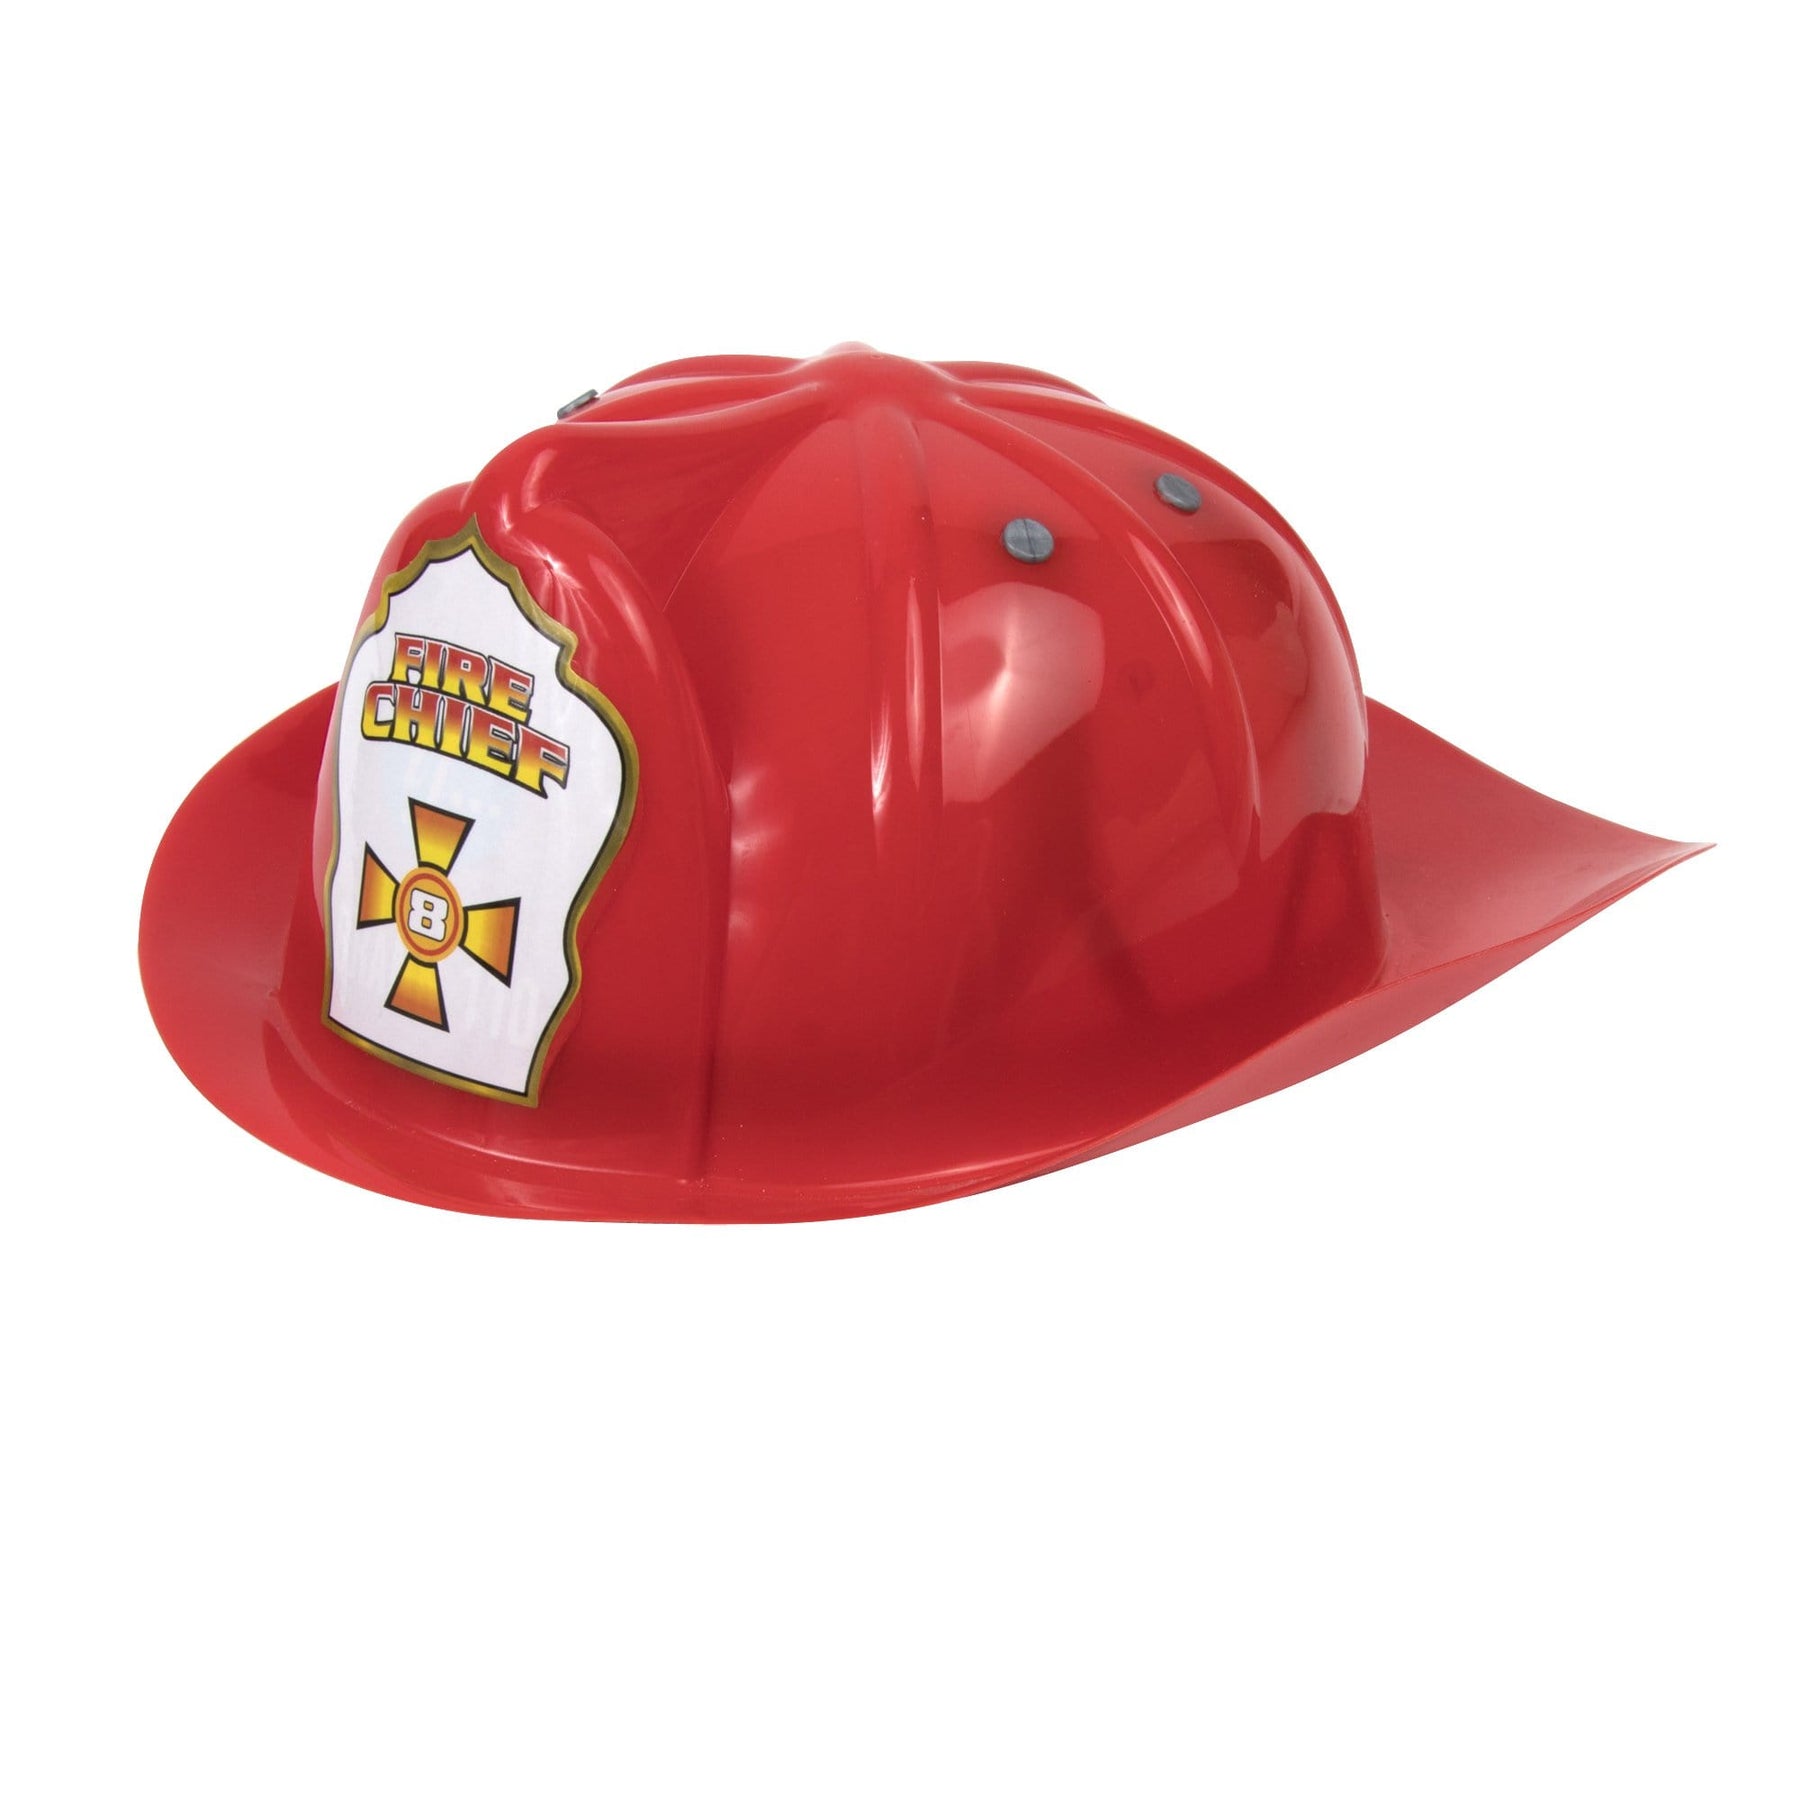 Wholesale Toys: Red Plastic Firefighter Hats for Kids - 